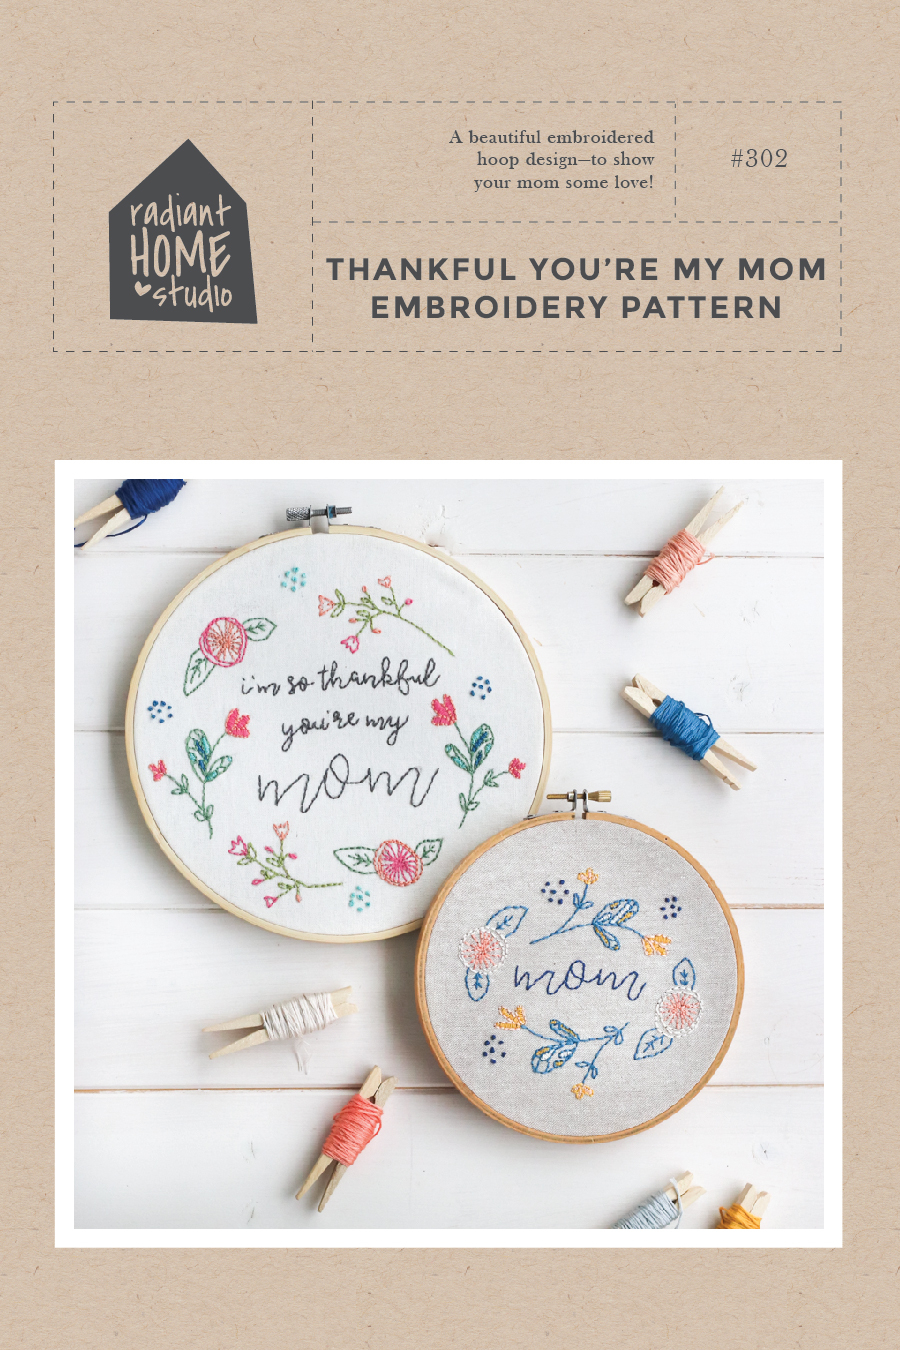 Free Paper Embroidery Patterns And Instructions Thankful Youre My Mom Embroidery Pattern